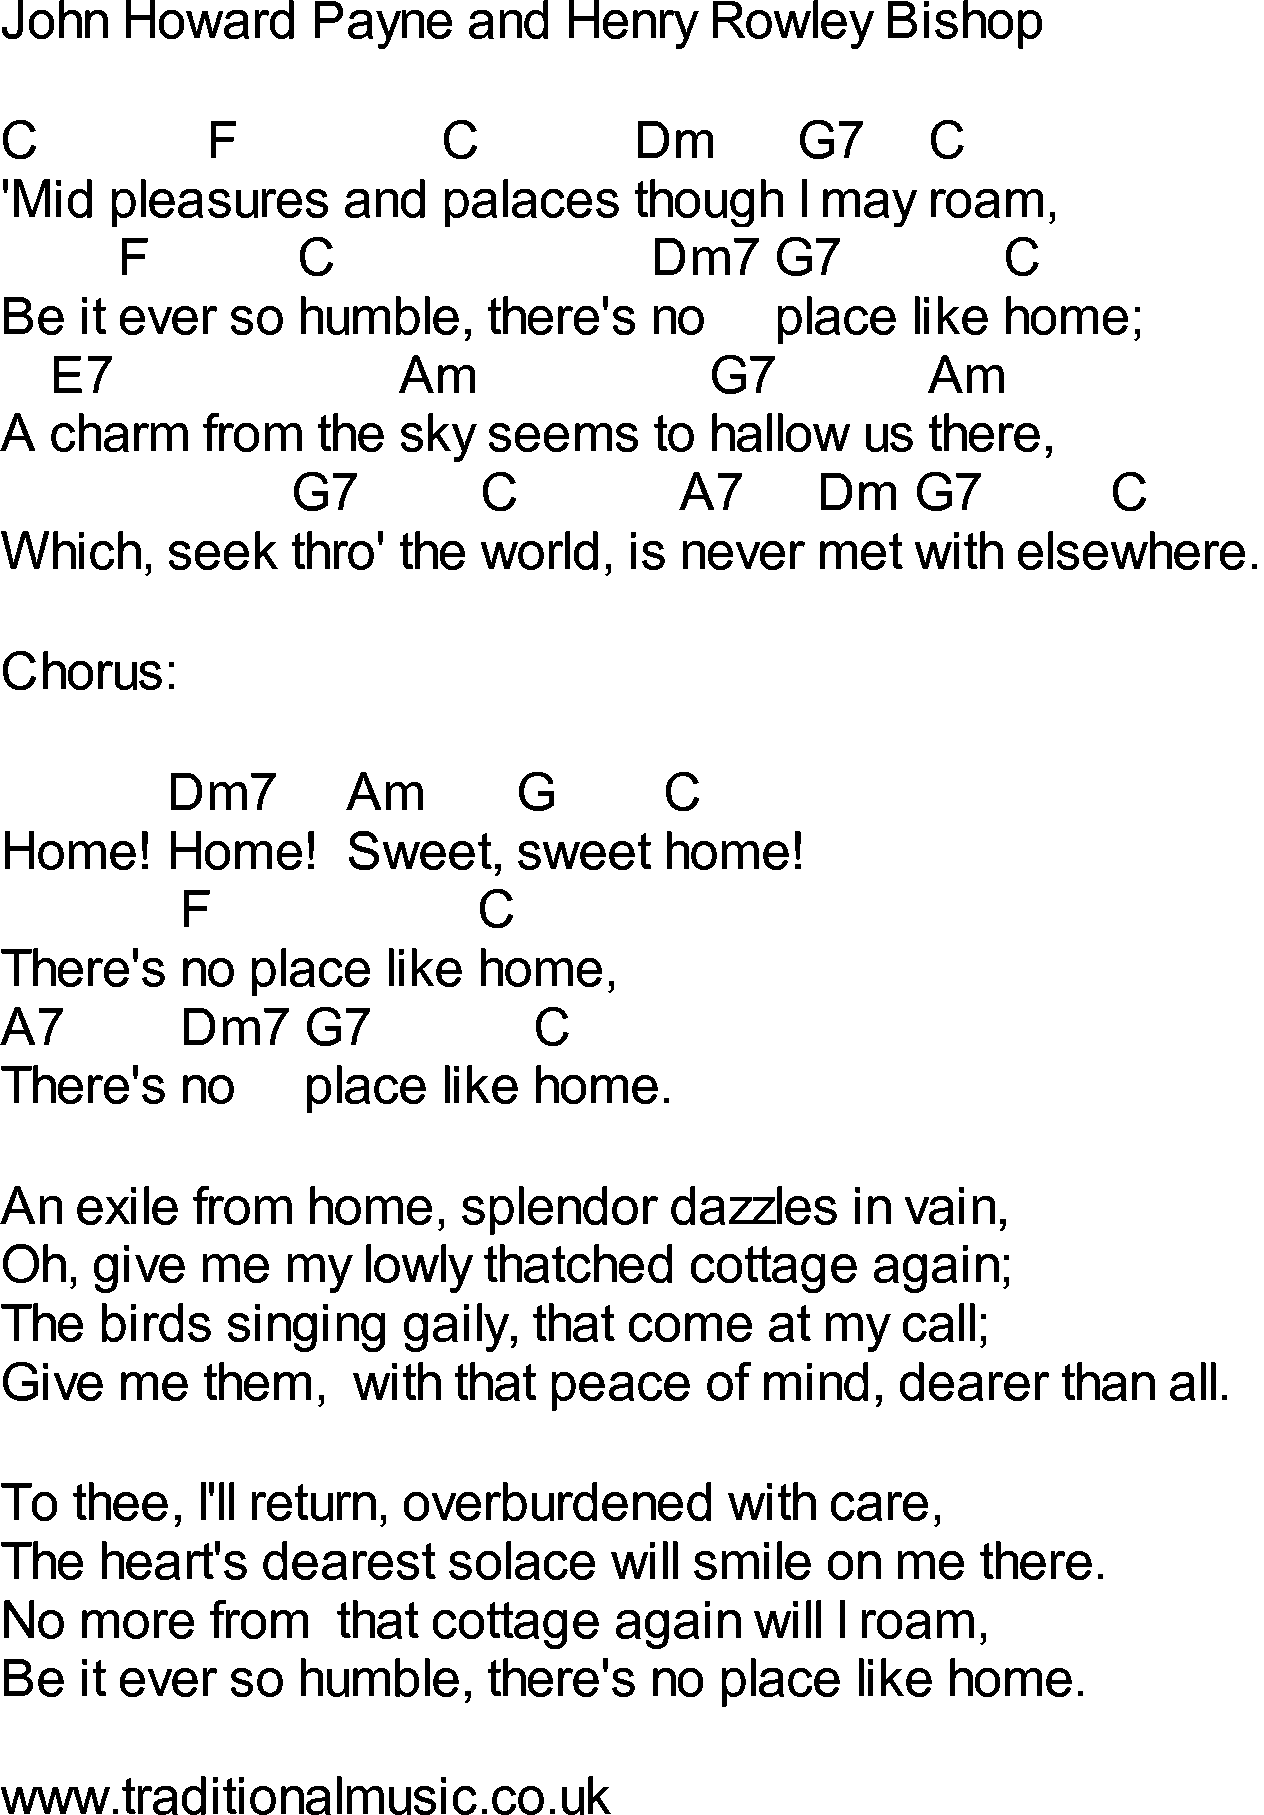 Bluegrass songs with chords - Home, Sweet Home